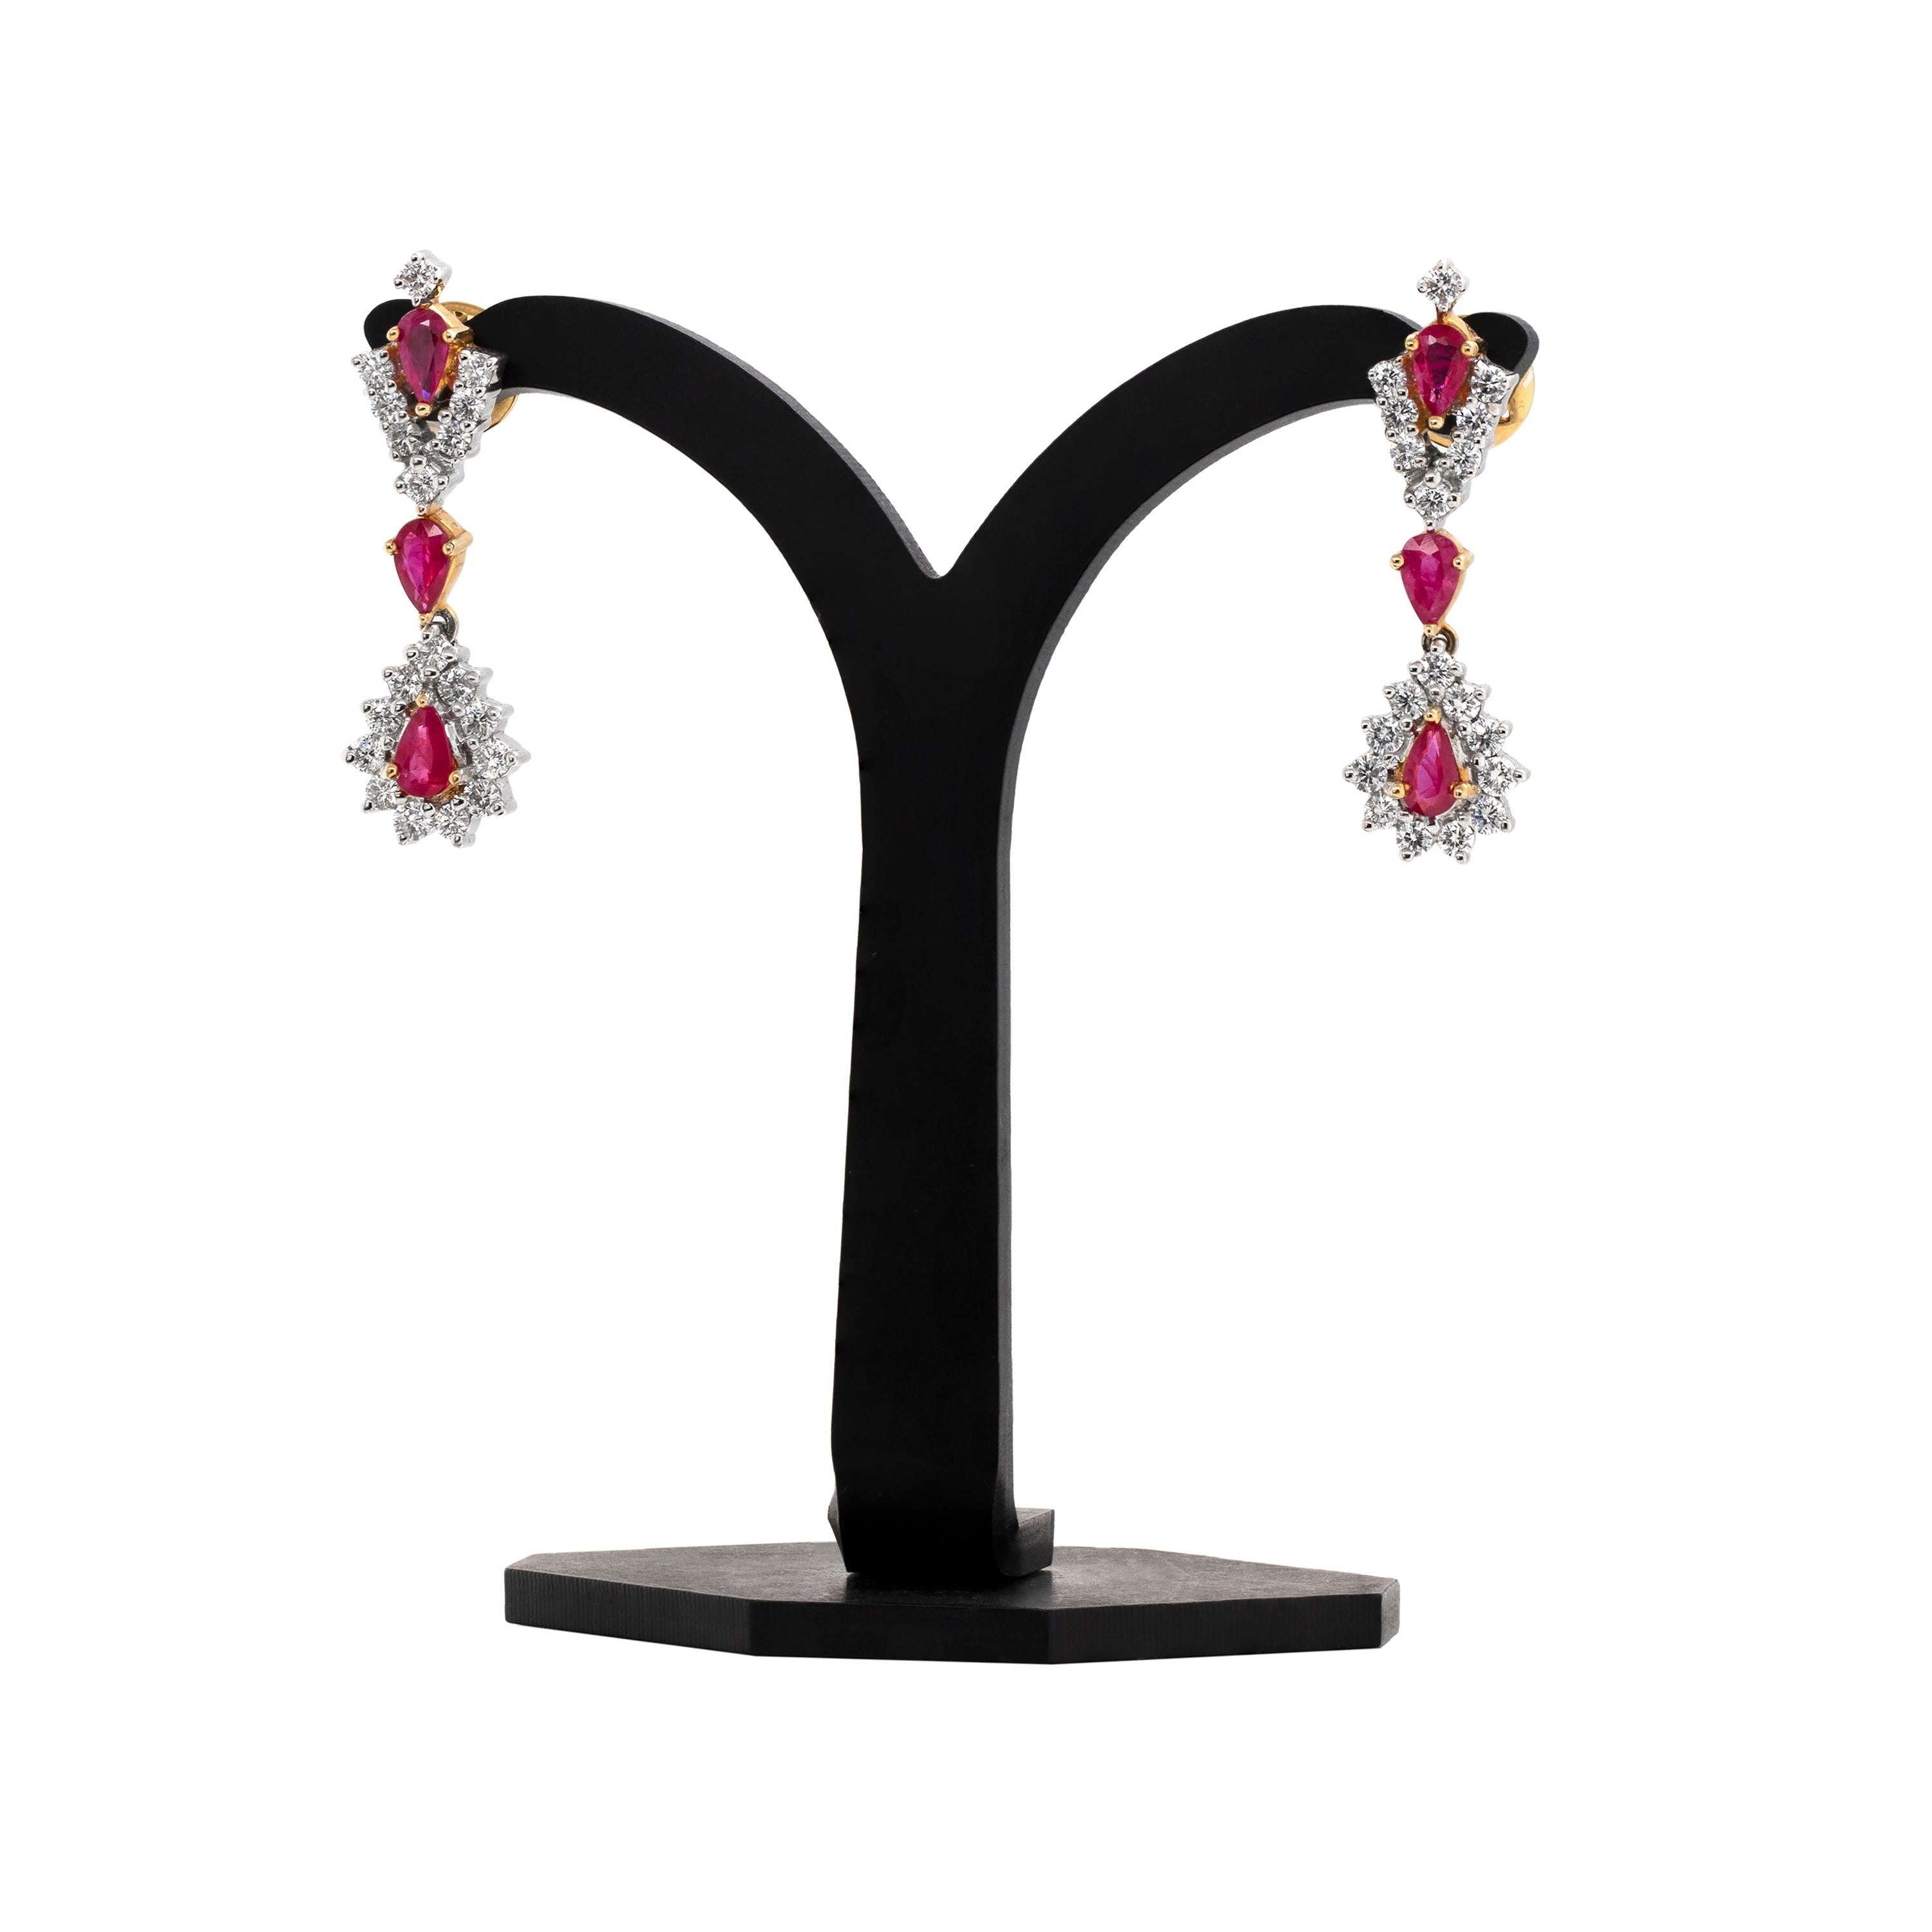 These exquisite drop earrings are beautifully set with three pear shaped rubies in each, weighing an approximate total weight of 1.30ct, all mounted in 18 carat yellow gold. The rubies are wonderfully accompanied by 19 round brilliant cut diamonds